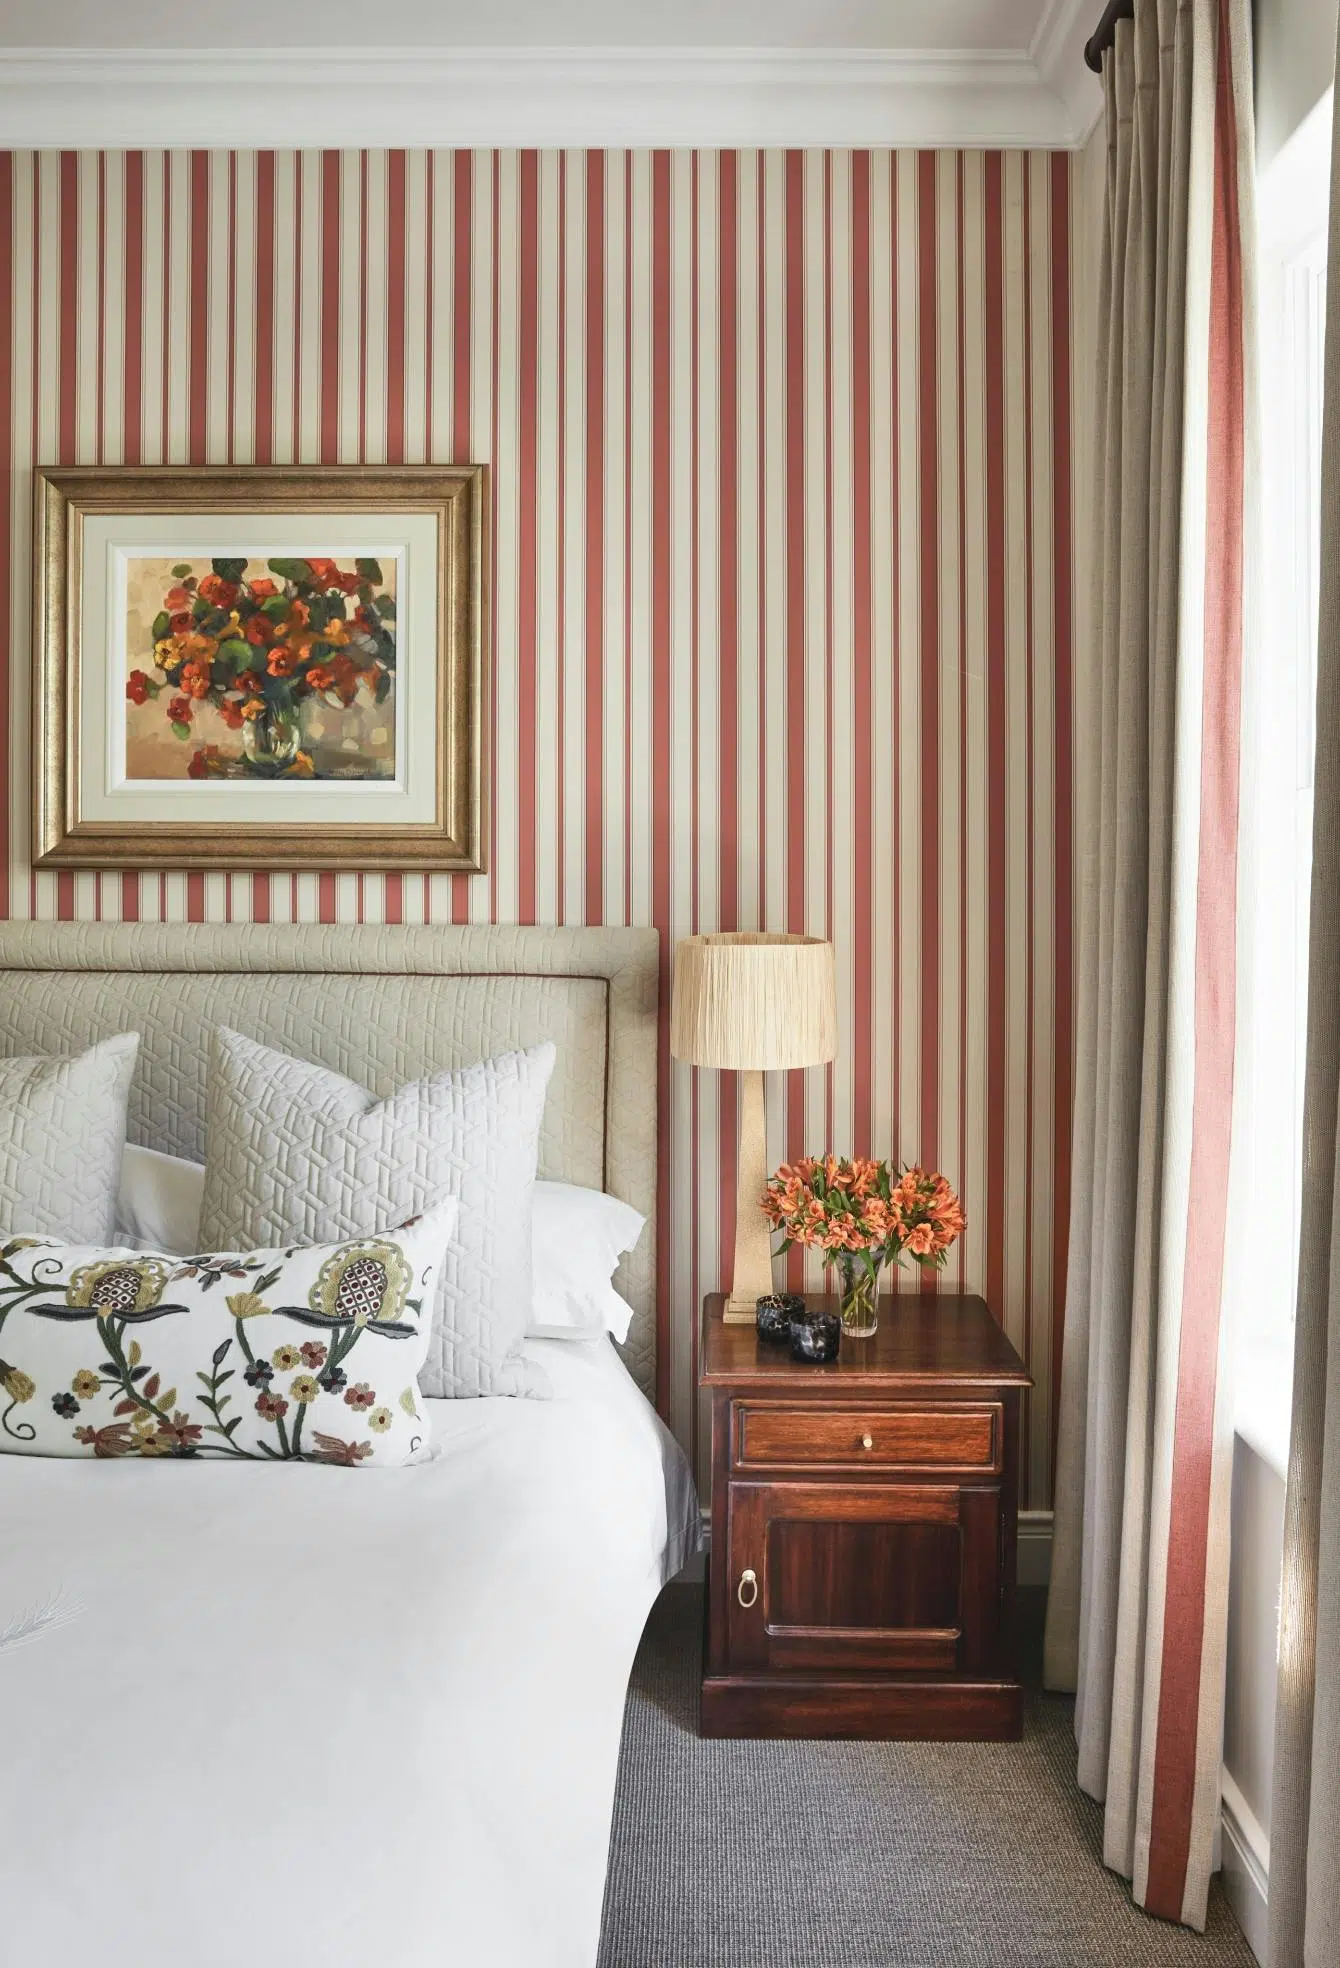 A bedroom with red and white striped wallpaper, a table lamp on wooden bedside table and an artwork of a vase of flowers hangs above the bed.